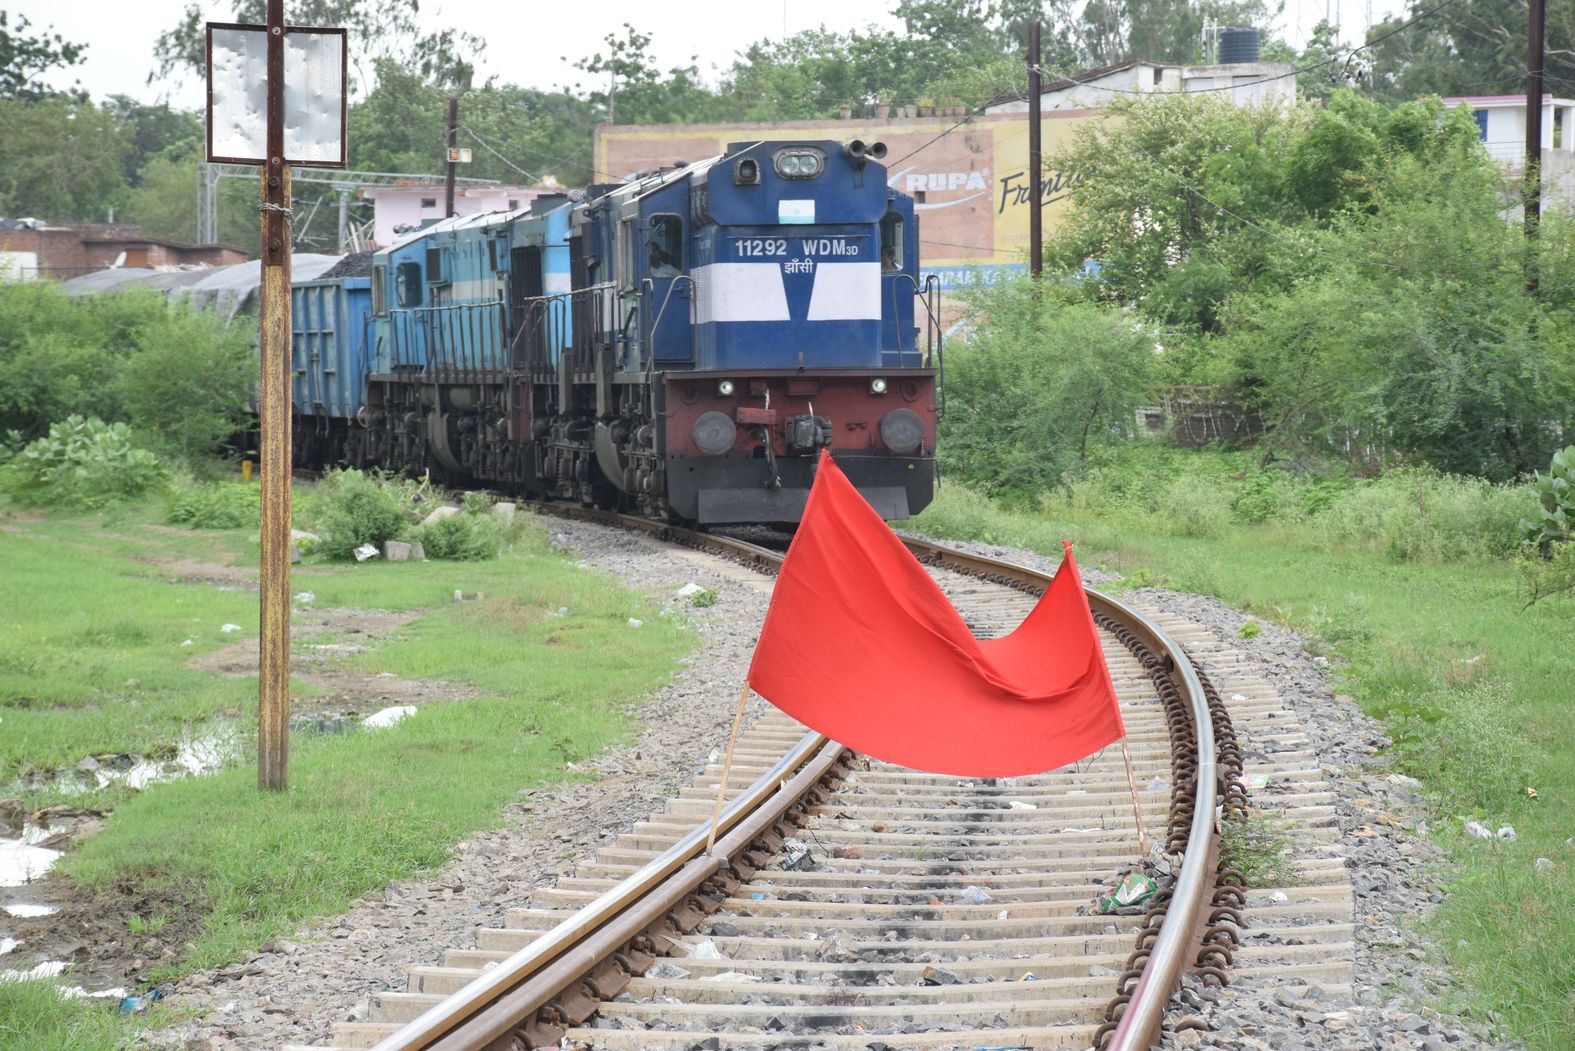 The goods train stopped after seeing the red flag, the officer ran